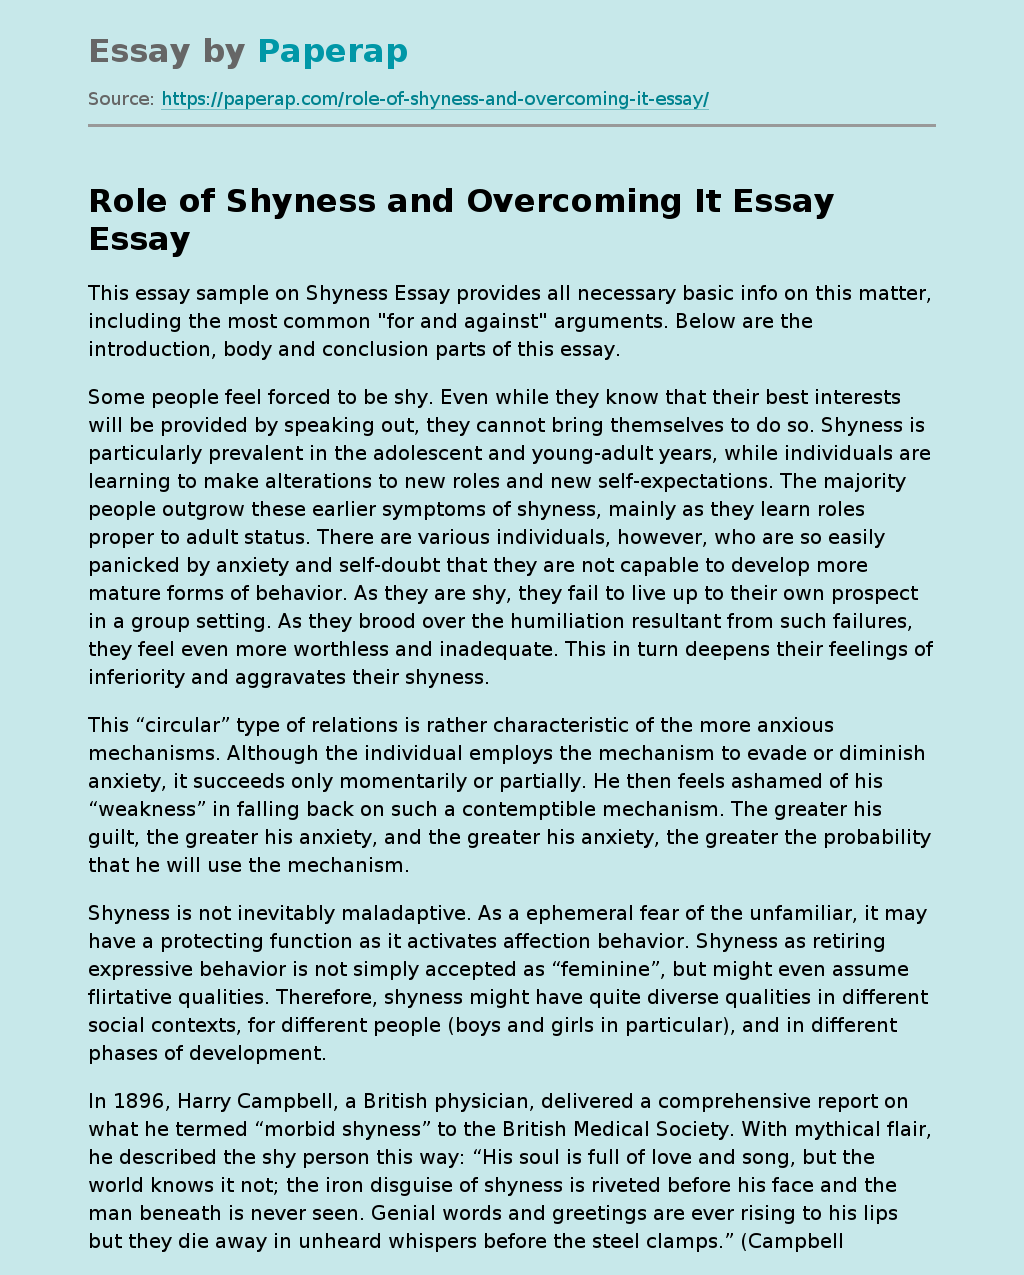 Role of Shyness and Overcoming It Essay